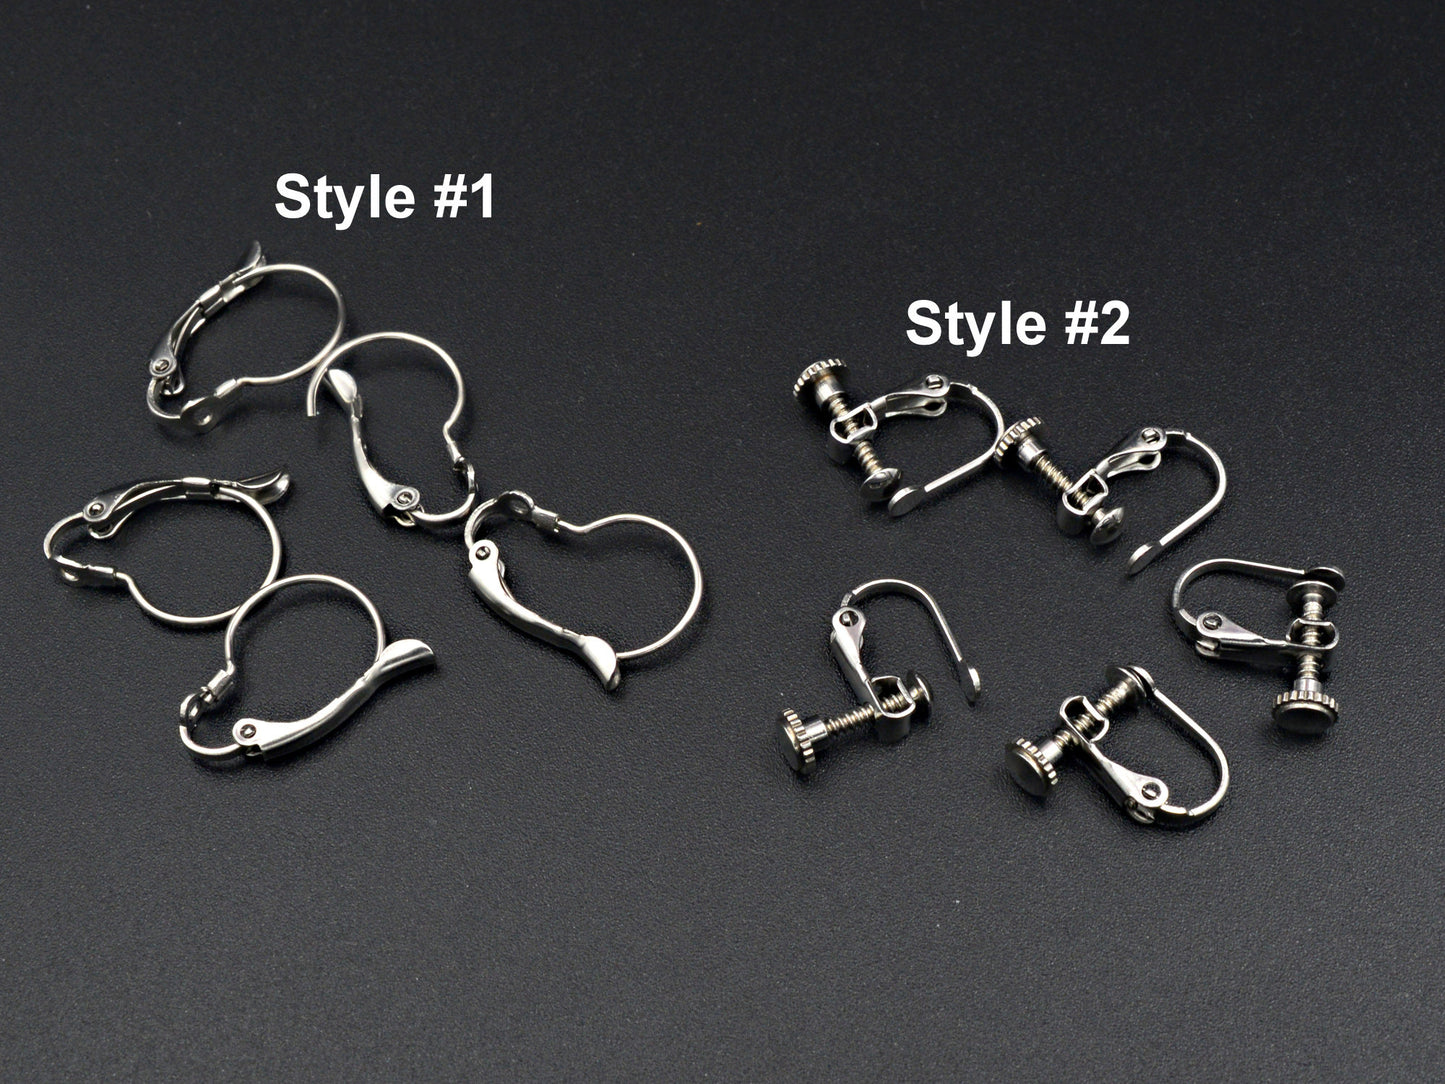 12 PCs Stainless Steel Earring lever back and Screw hook Jewelry Findings Supply For Jewelry Making and Wholesale